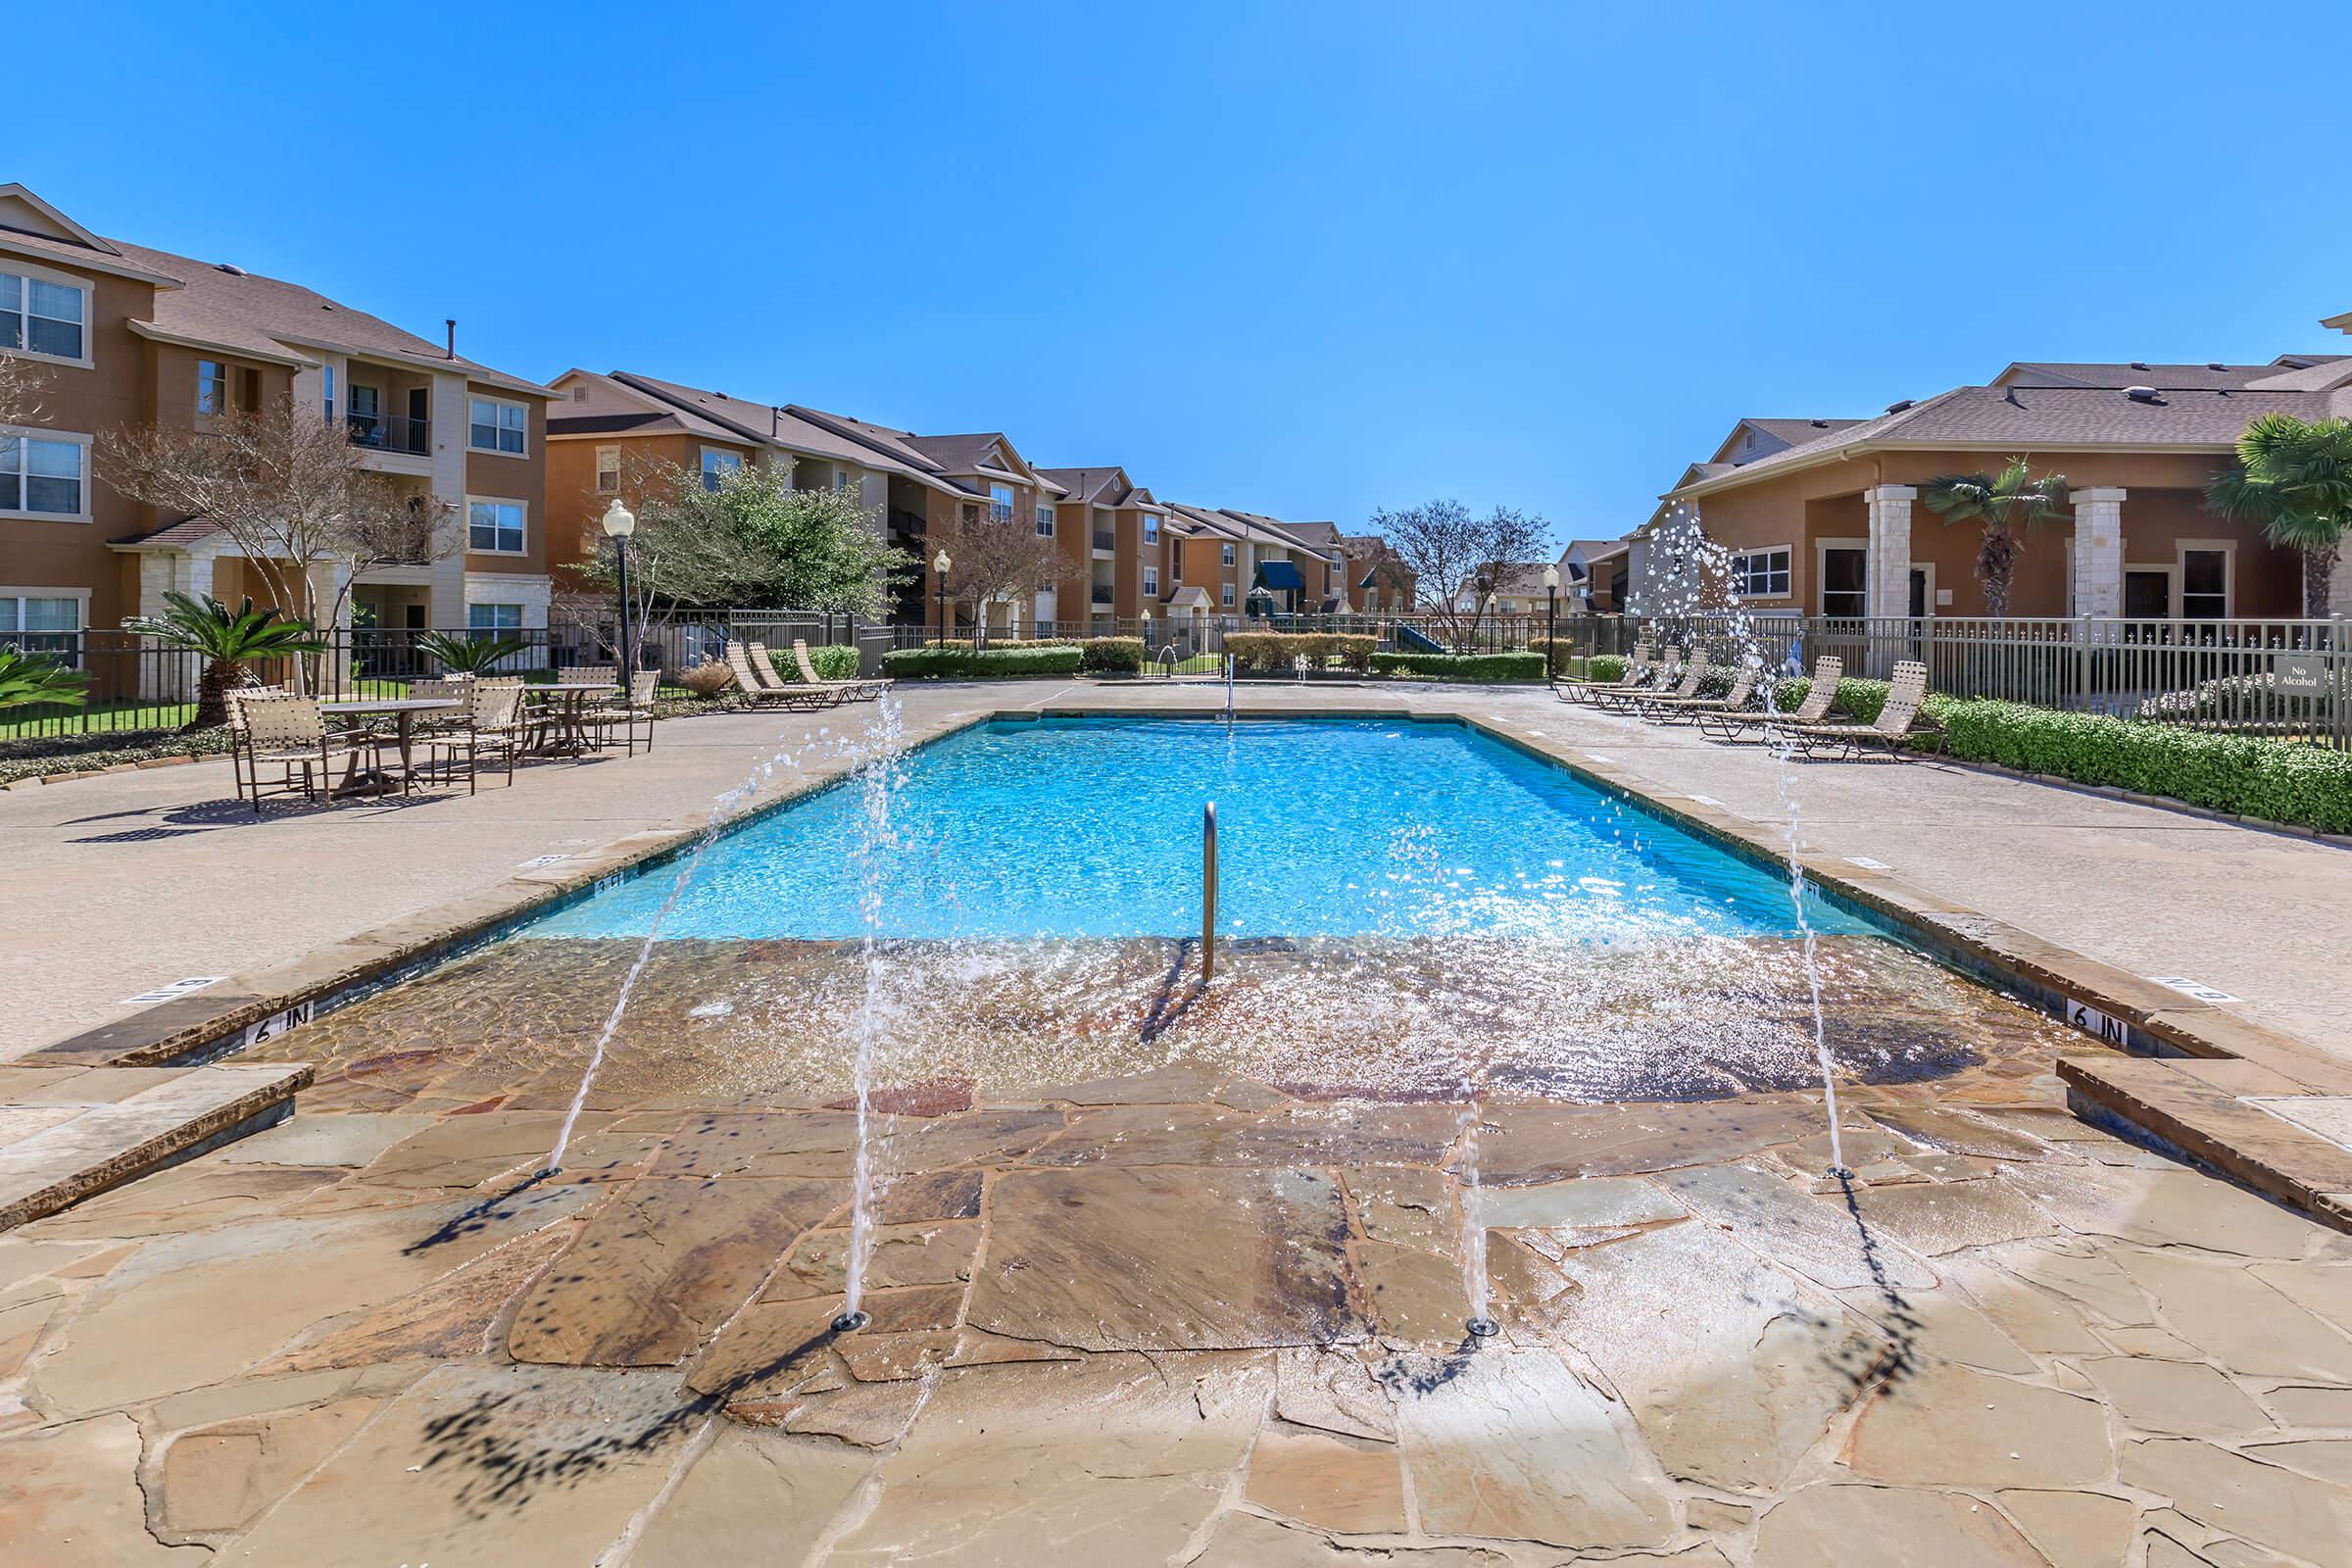 SPARKLING SWIMMING POOL AT SOUTHPARK RANCH APARTMENTS